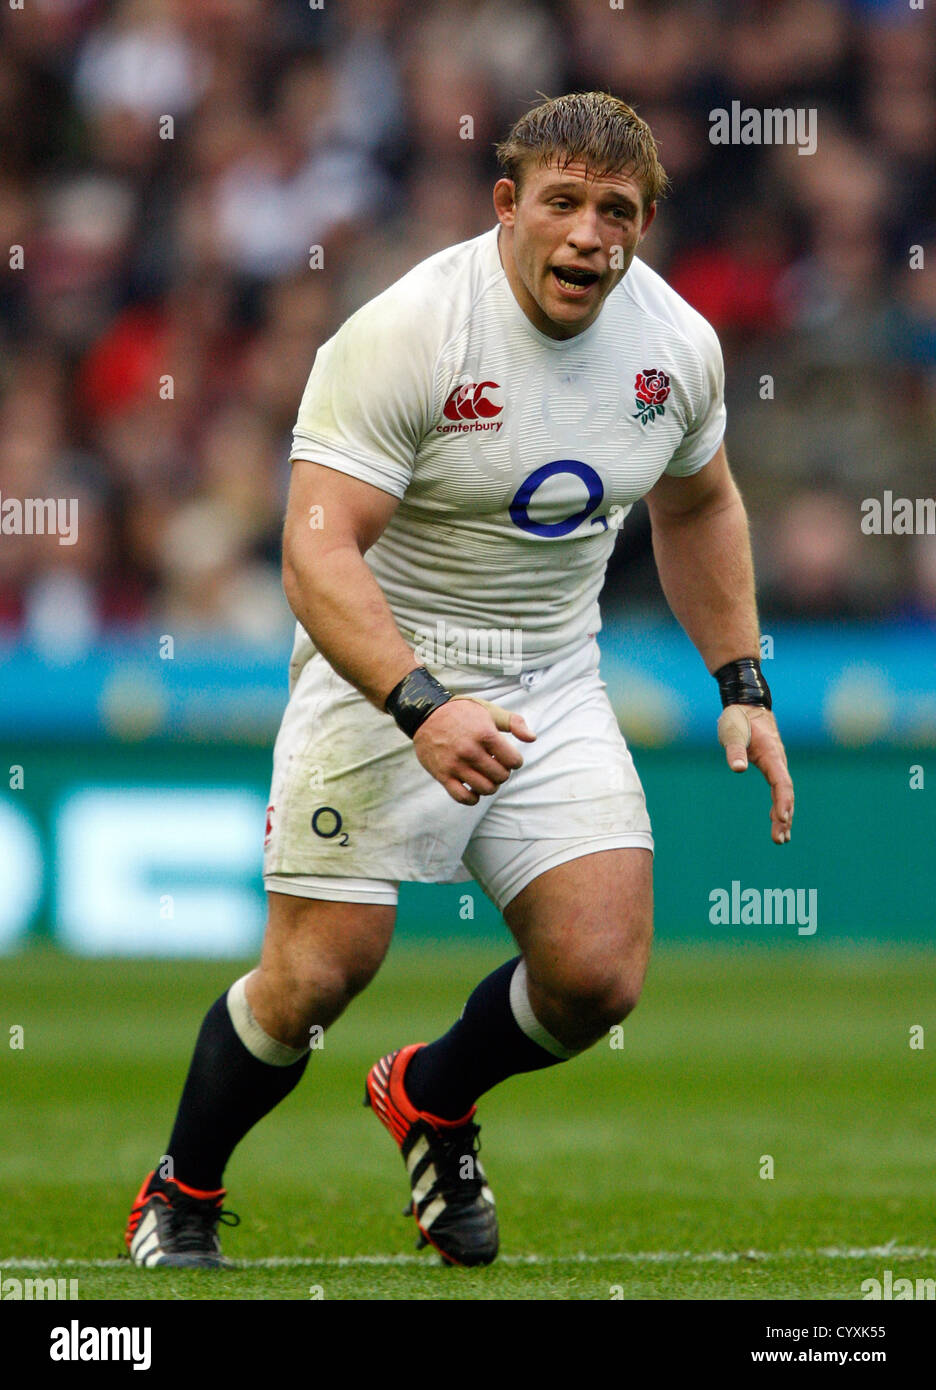 TOM YOUNGS TWICKENHAM MIDDLESEX ANGLETERRE ANGLETERRE RU 10 Novembre 2012 Banque D'Images